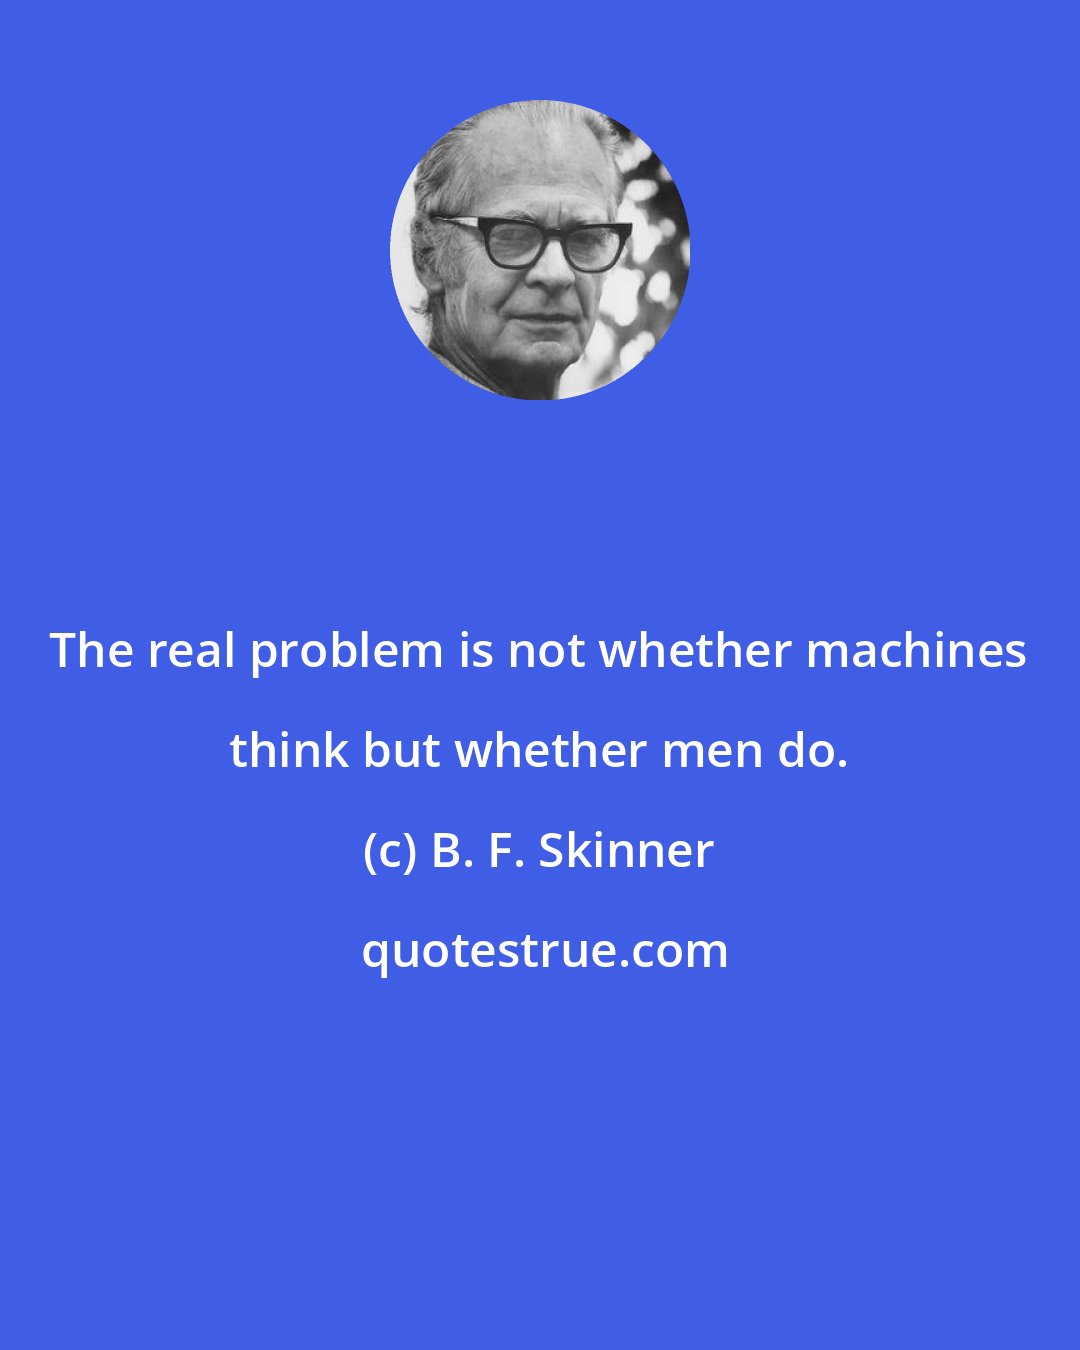 B. F. Skinner: The real problem is not whether machines think but whether men do.